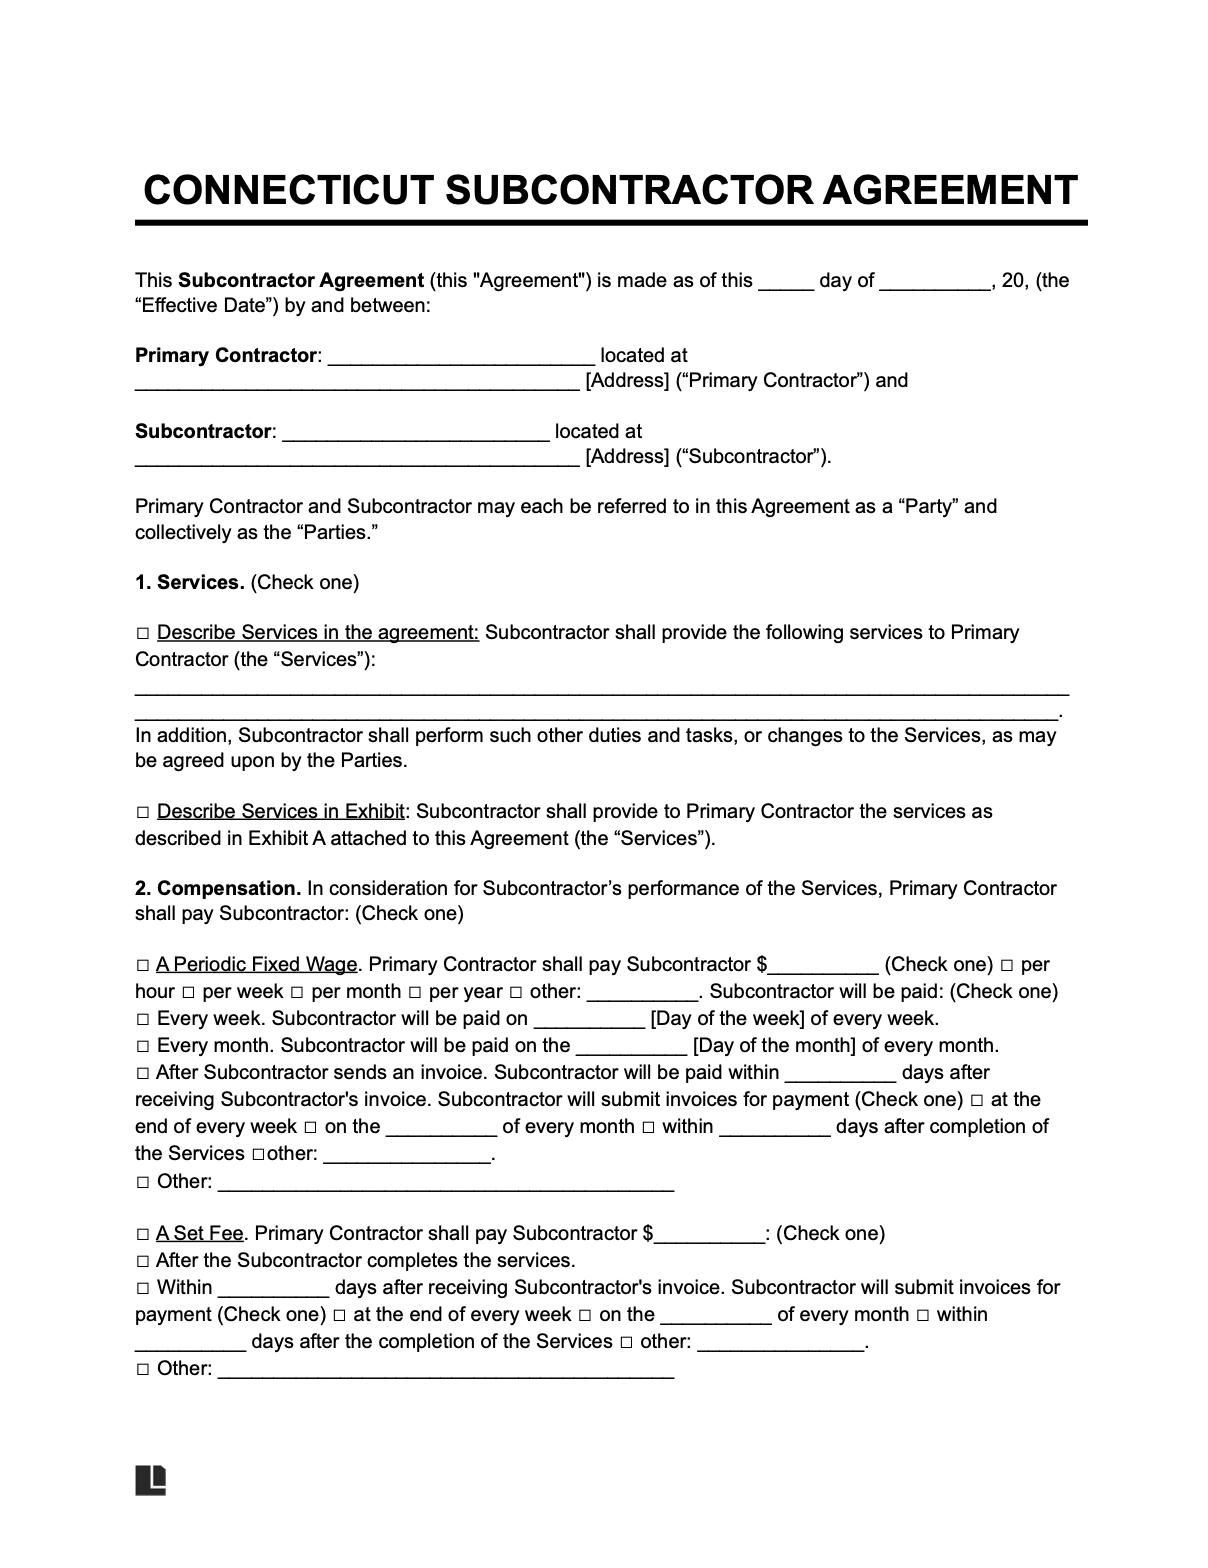 connecticut subcontractor agreement template